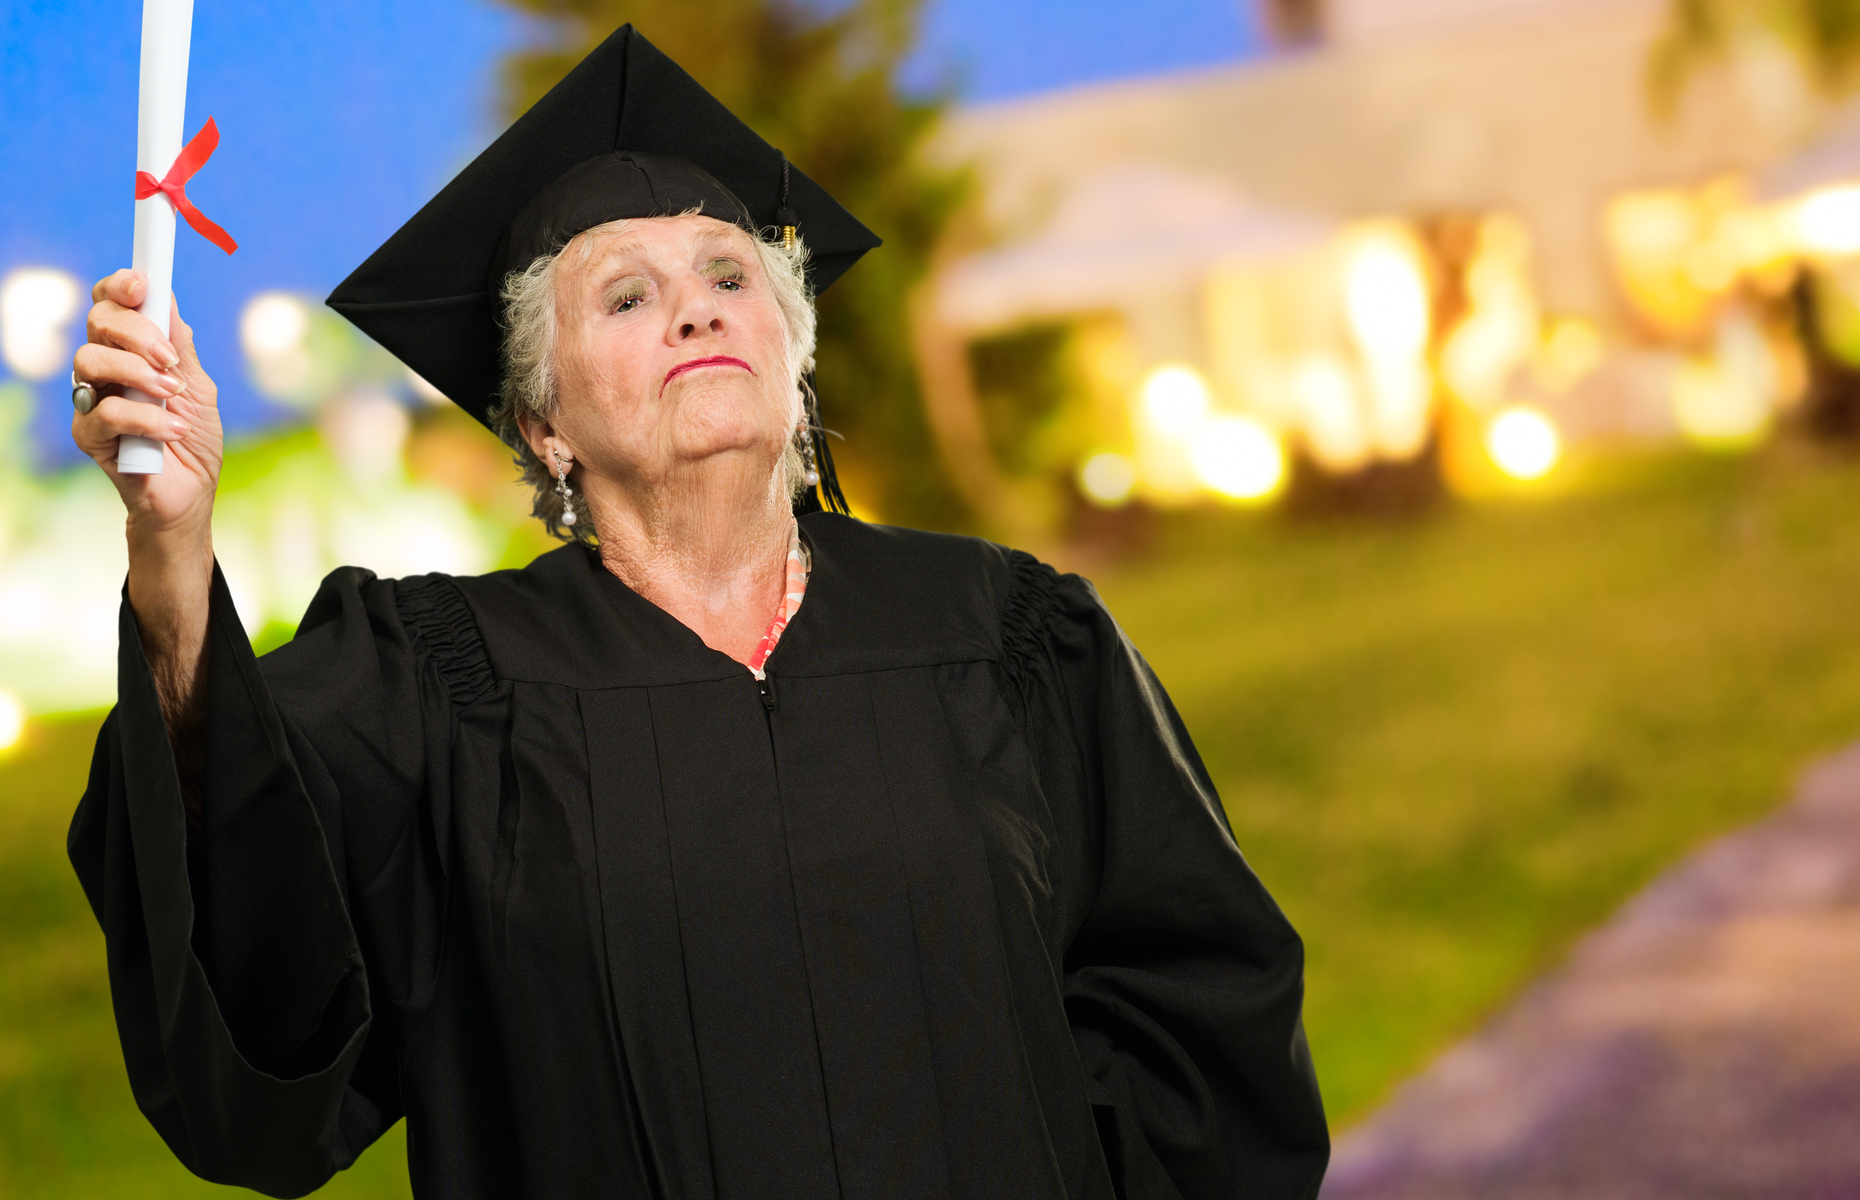 <p>As boomers enter their golden years, they have more time to go back to school. They also have more time to accrue student loan debt. Consumers between the ages of 55 and 73 had the second-highest student loan balances of any generation in the first quarter of 2019, carrying an average of <a href="https://www.experian.com/blogs/ask-experian/research/baby-boomers-and-student-loan-debt/" class="atom_link atom_valid" rel="noreferrer noopener">$34,703 USD in student loan debt</a>.</p><p>To be fair, some of this can be attributed to parents helping their children pay for school.</p>